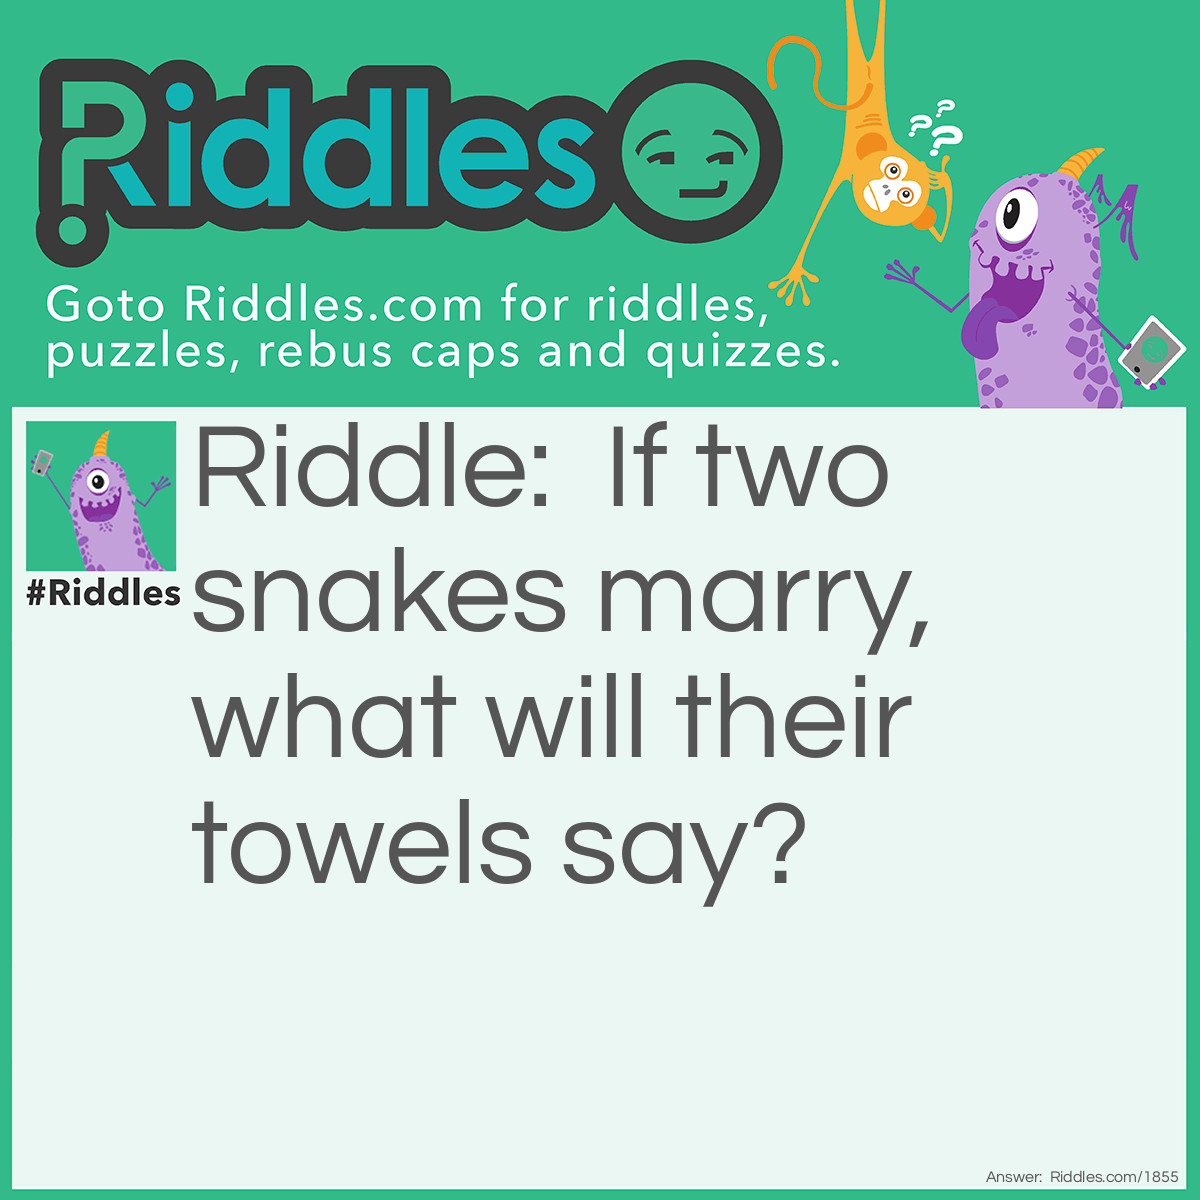 Riddle: If two snakes marry, what will their towels say? Answer: Hiss and Hers.